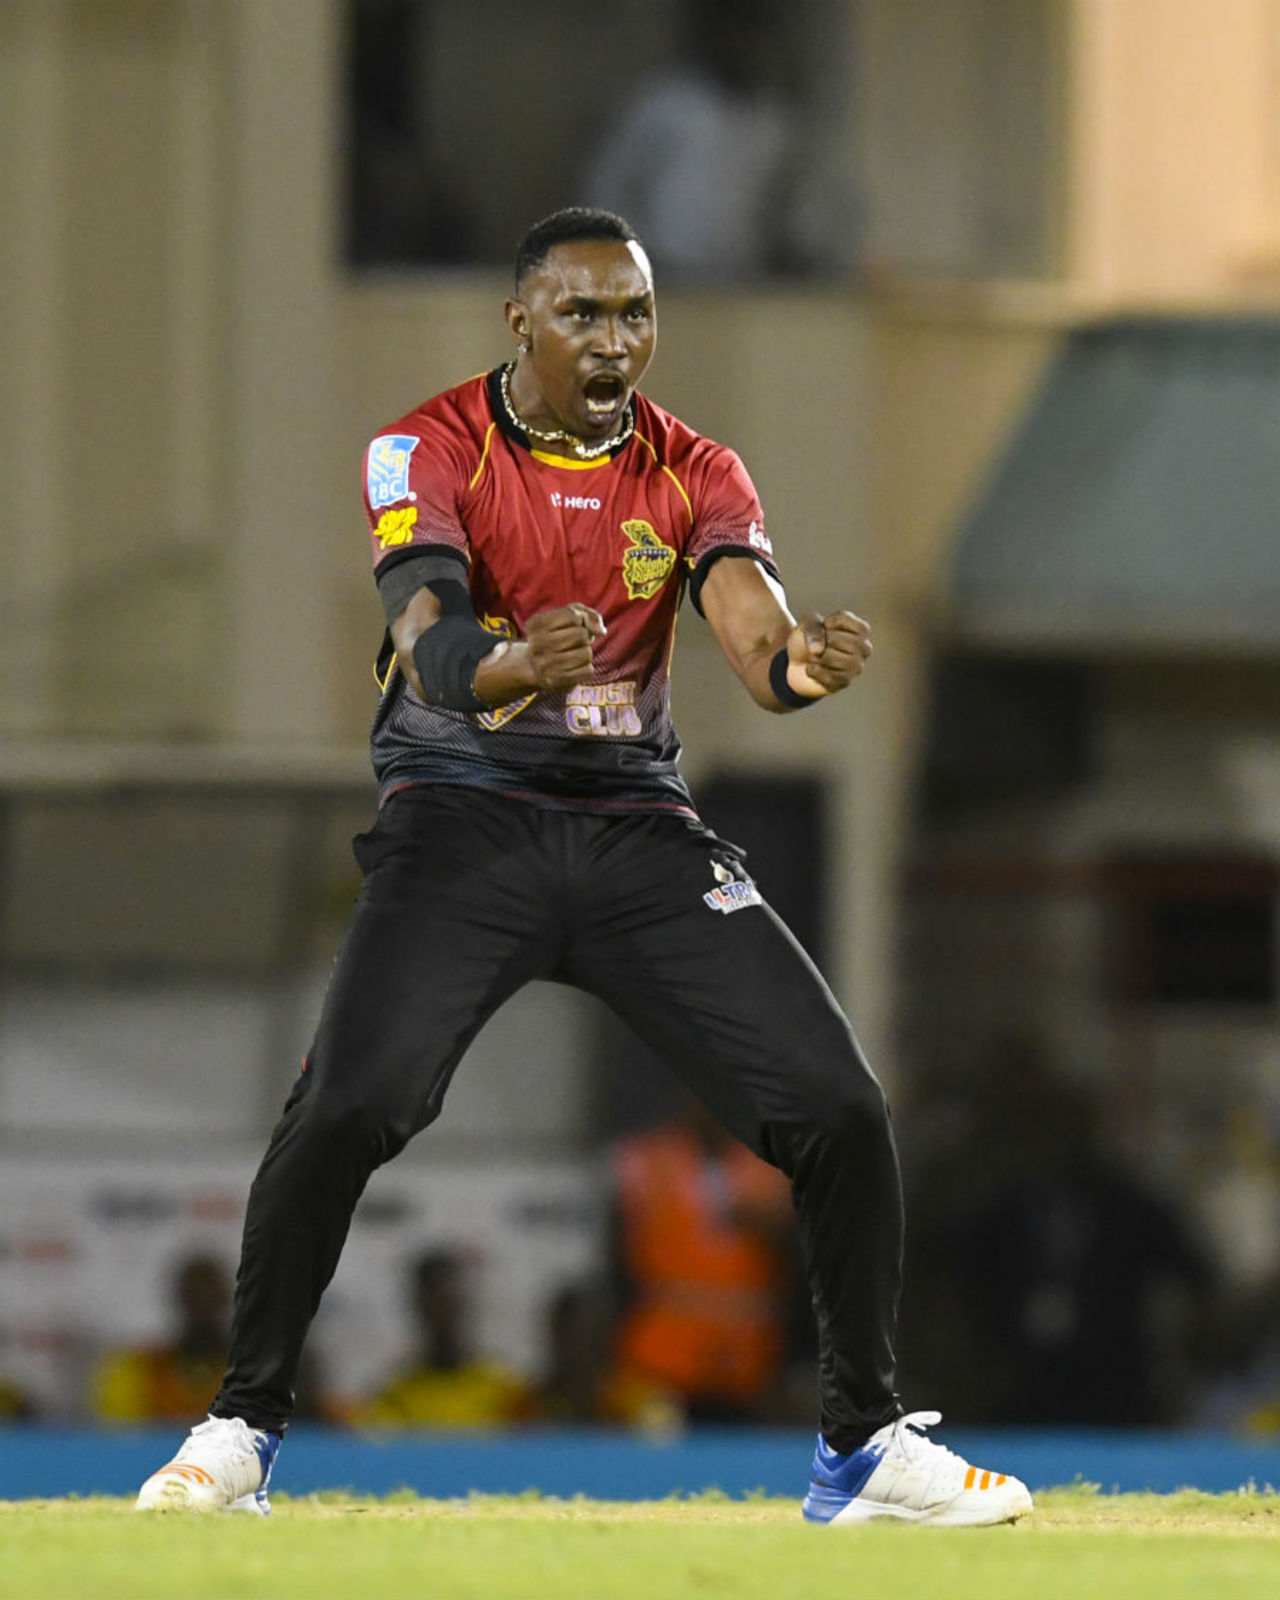 Dwayne Bravo celebrates his return to competitive cricket after eight months, St Lucia Stars v Trinbago Knight Riders, Gros Islet, CPL, August 5, 2017